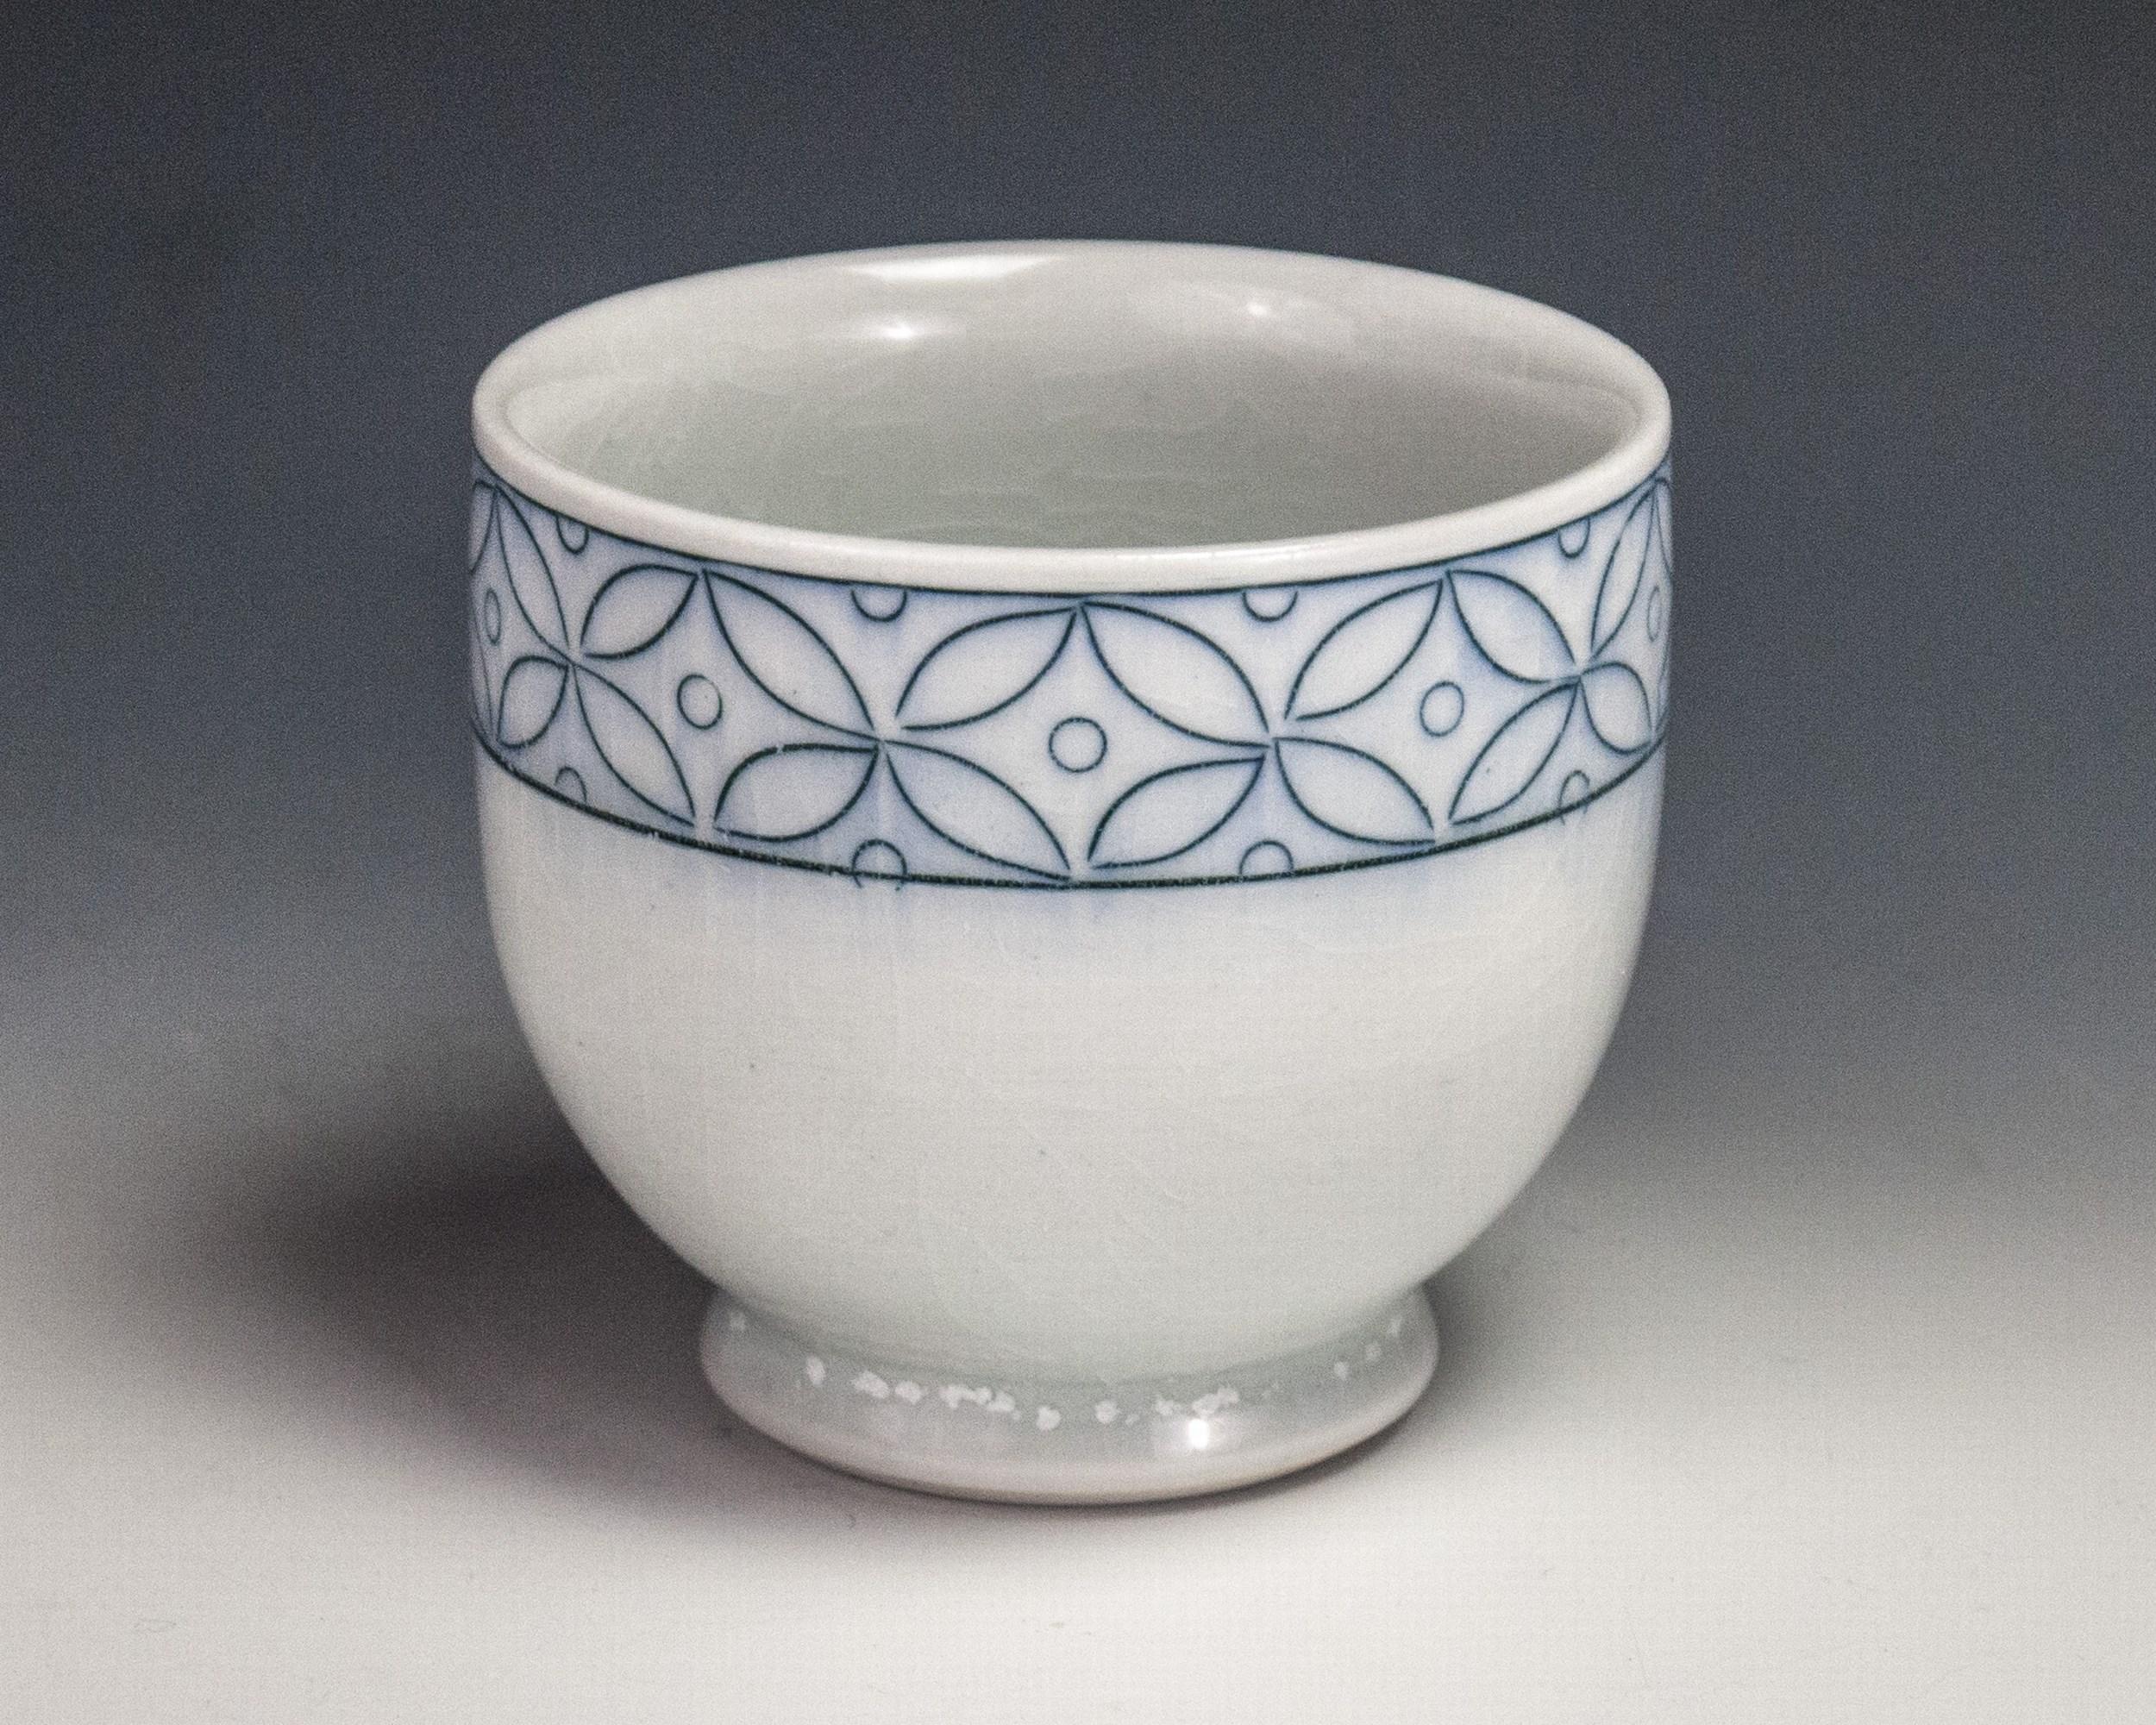 Sgraffito Seed Cup - Art by Steven Young Lee